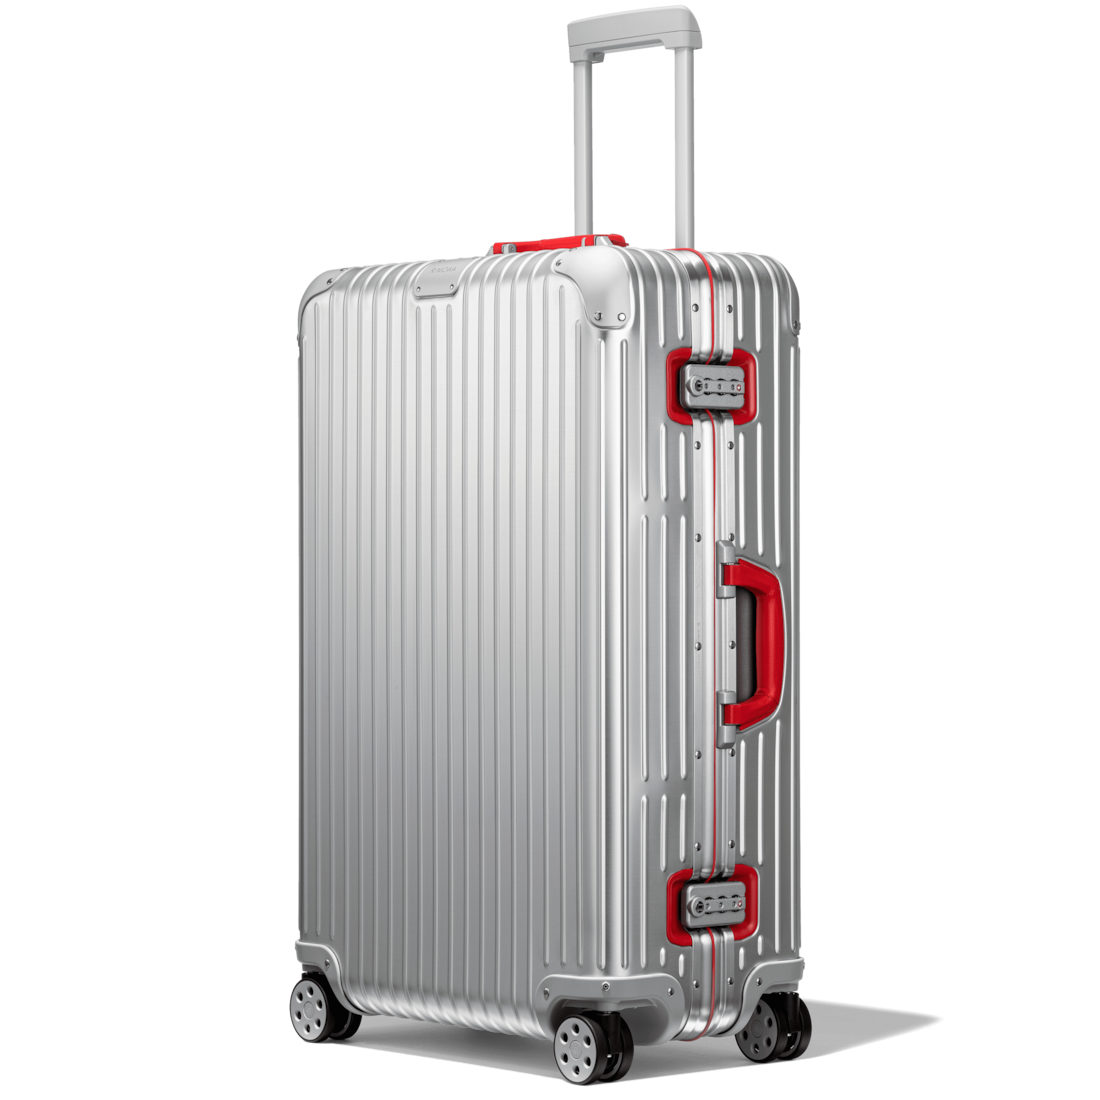 RIMOWA Check-In L Twist: Best Checked Luggage for Europe